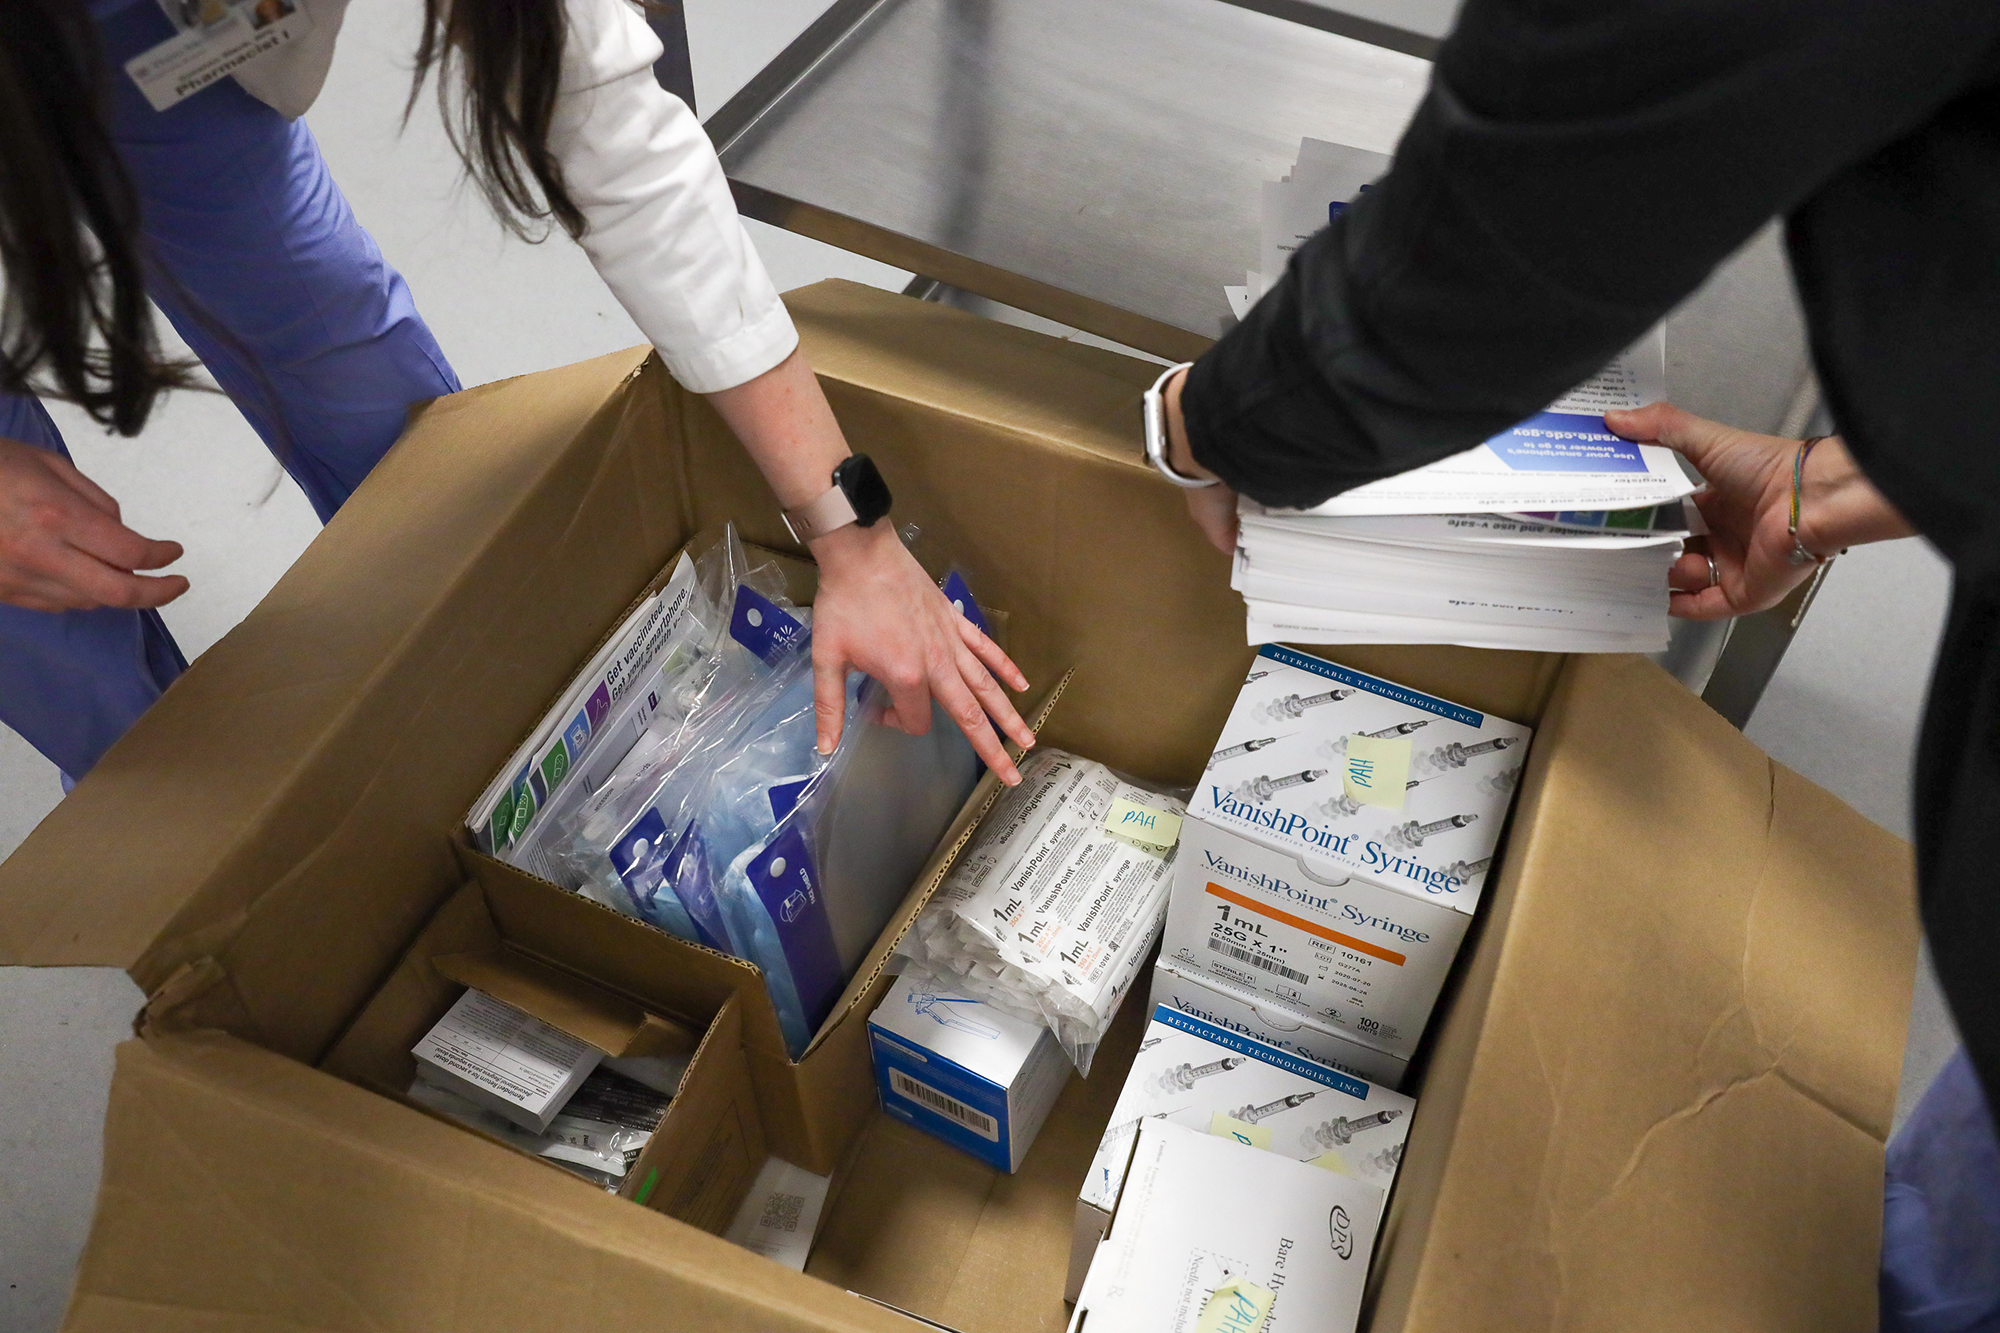 Two medical personnel unpack a large cardboard box containing syringes and medical equipment for vaccine distribution.